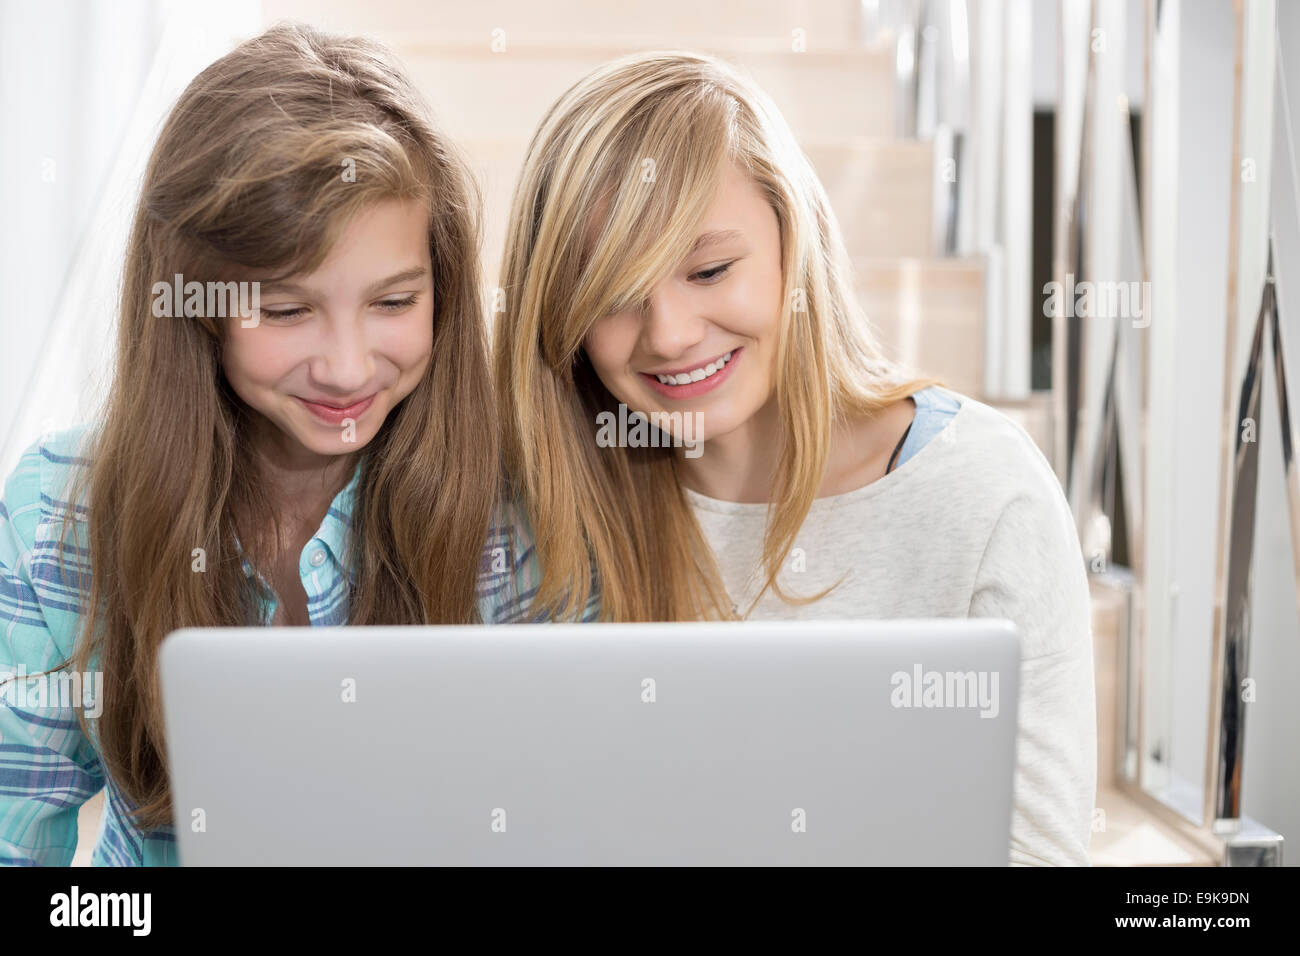 Sisters using laptop on stairway Stock Photo